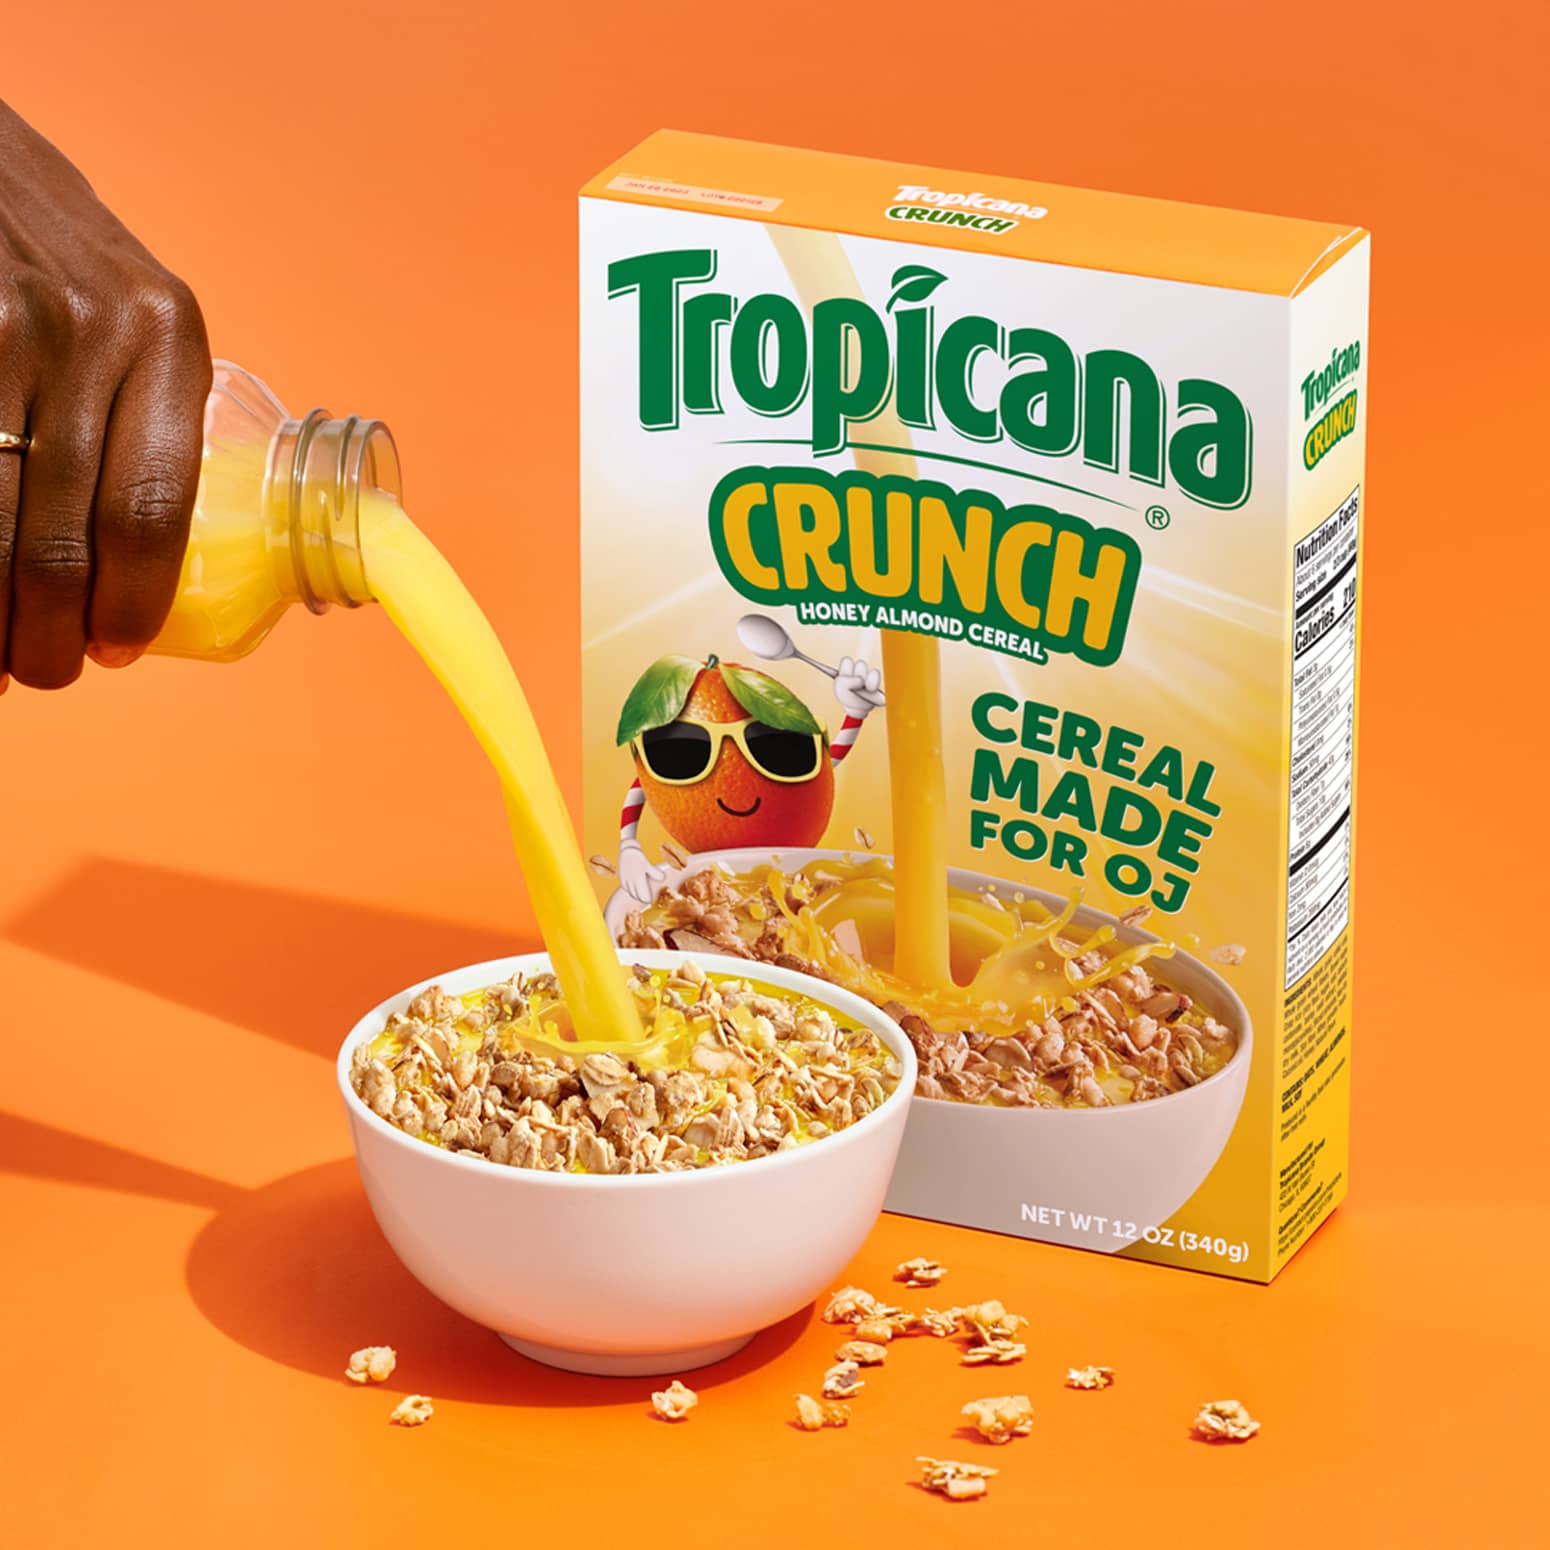 Tropicana Crunch - Cereal Made For Orange Juice!